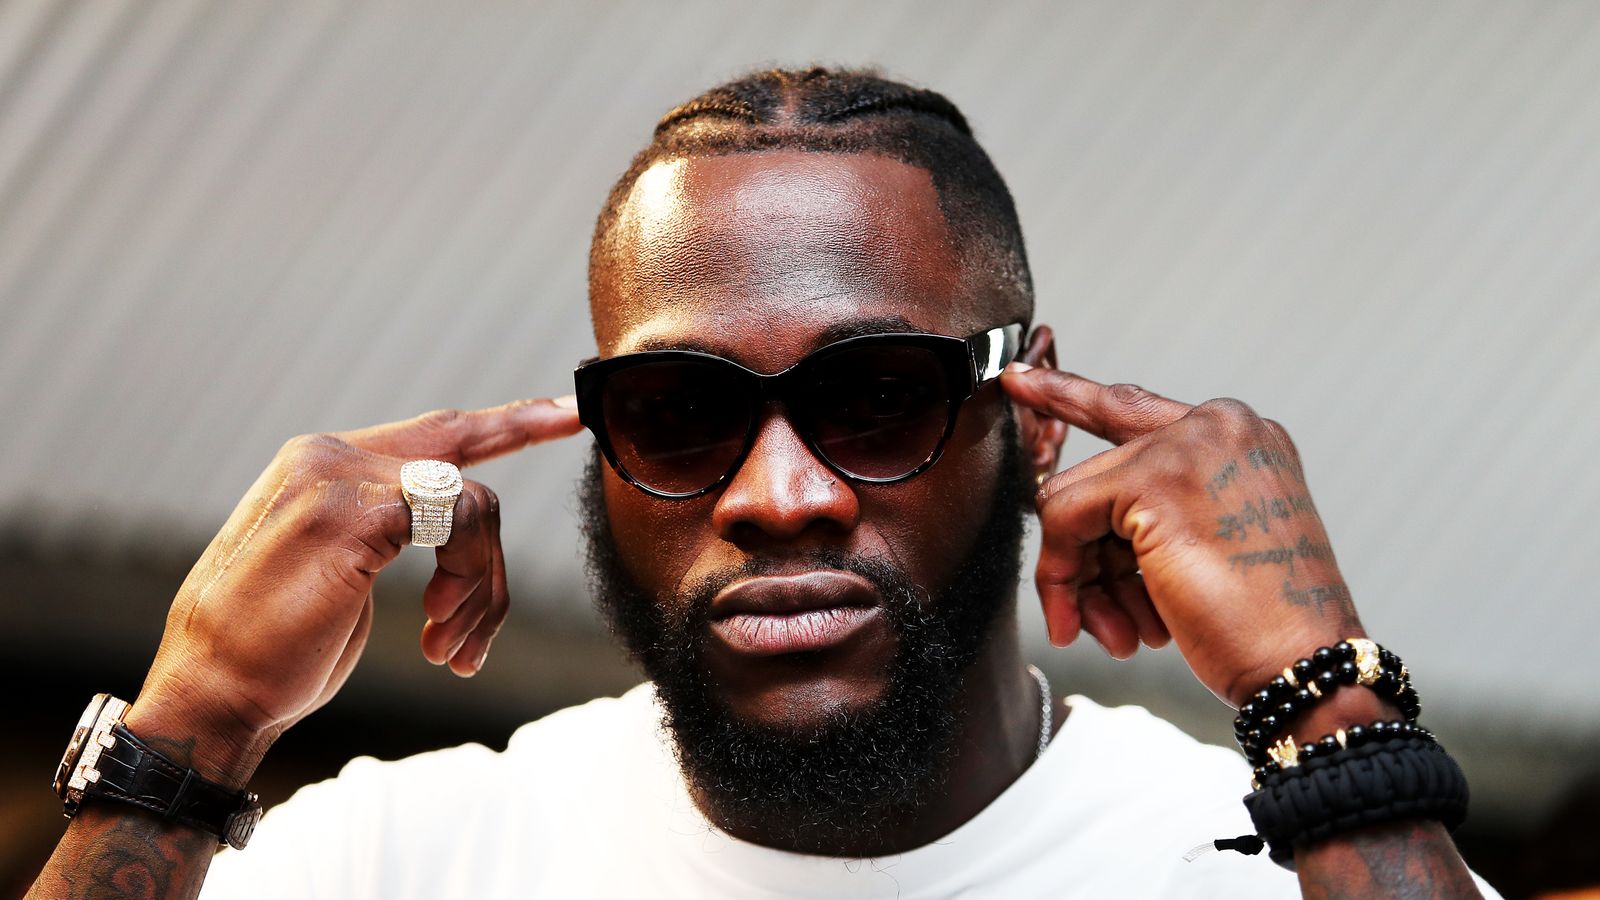 Deontay Wilder compared himself to Muhammad Ali